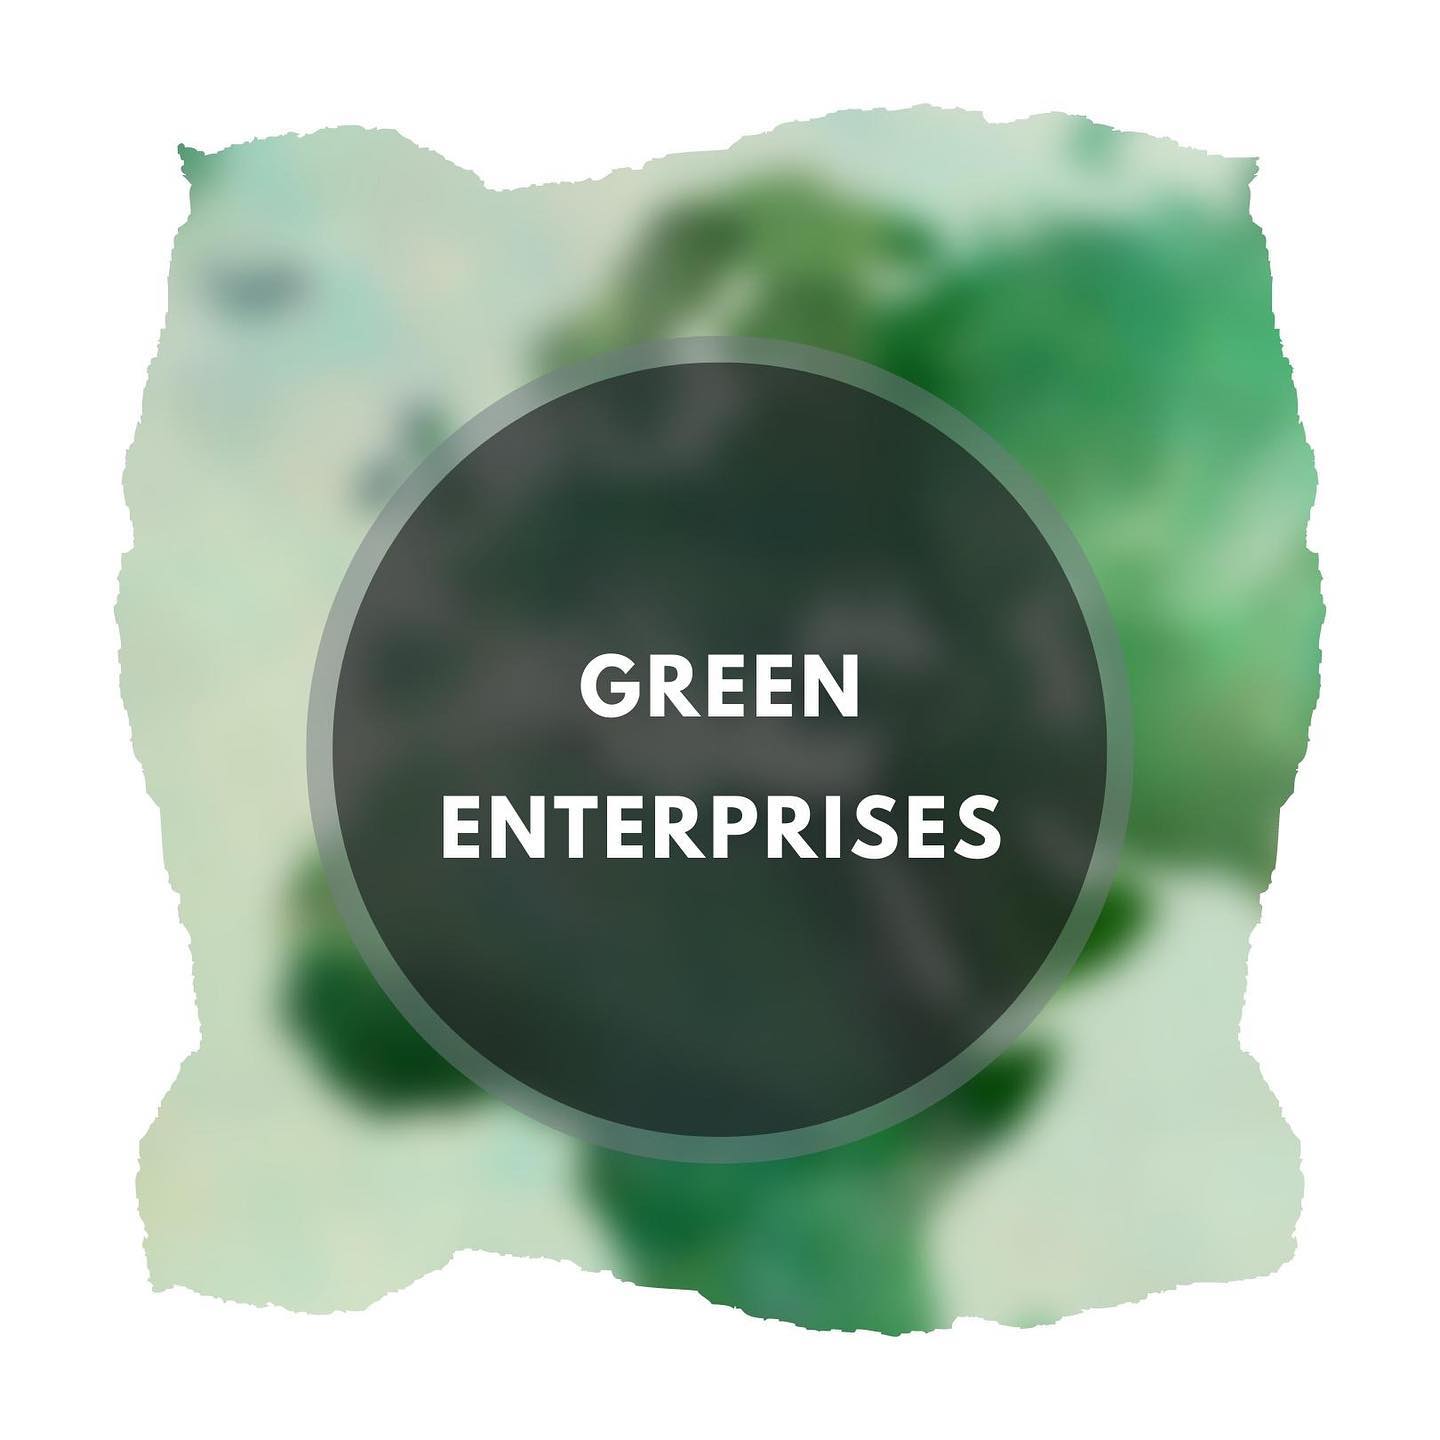 Following our @gimed_enicbcmed project's technical and financial assistance of #greenSMEs in the Euro Mediterranean region, our RESET project will capitalise on GIMED's results to help facilitate the development of #greenenterprises through research, knowledge sharing, and policy recommendations. 
#greeneconomy #greenbusiness #GOMED #onemed @enicbcmed